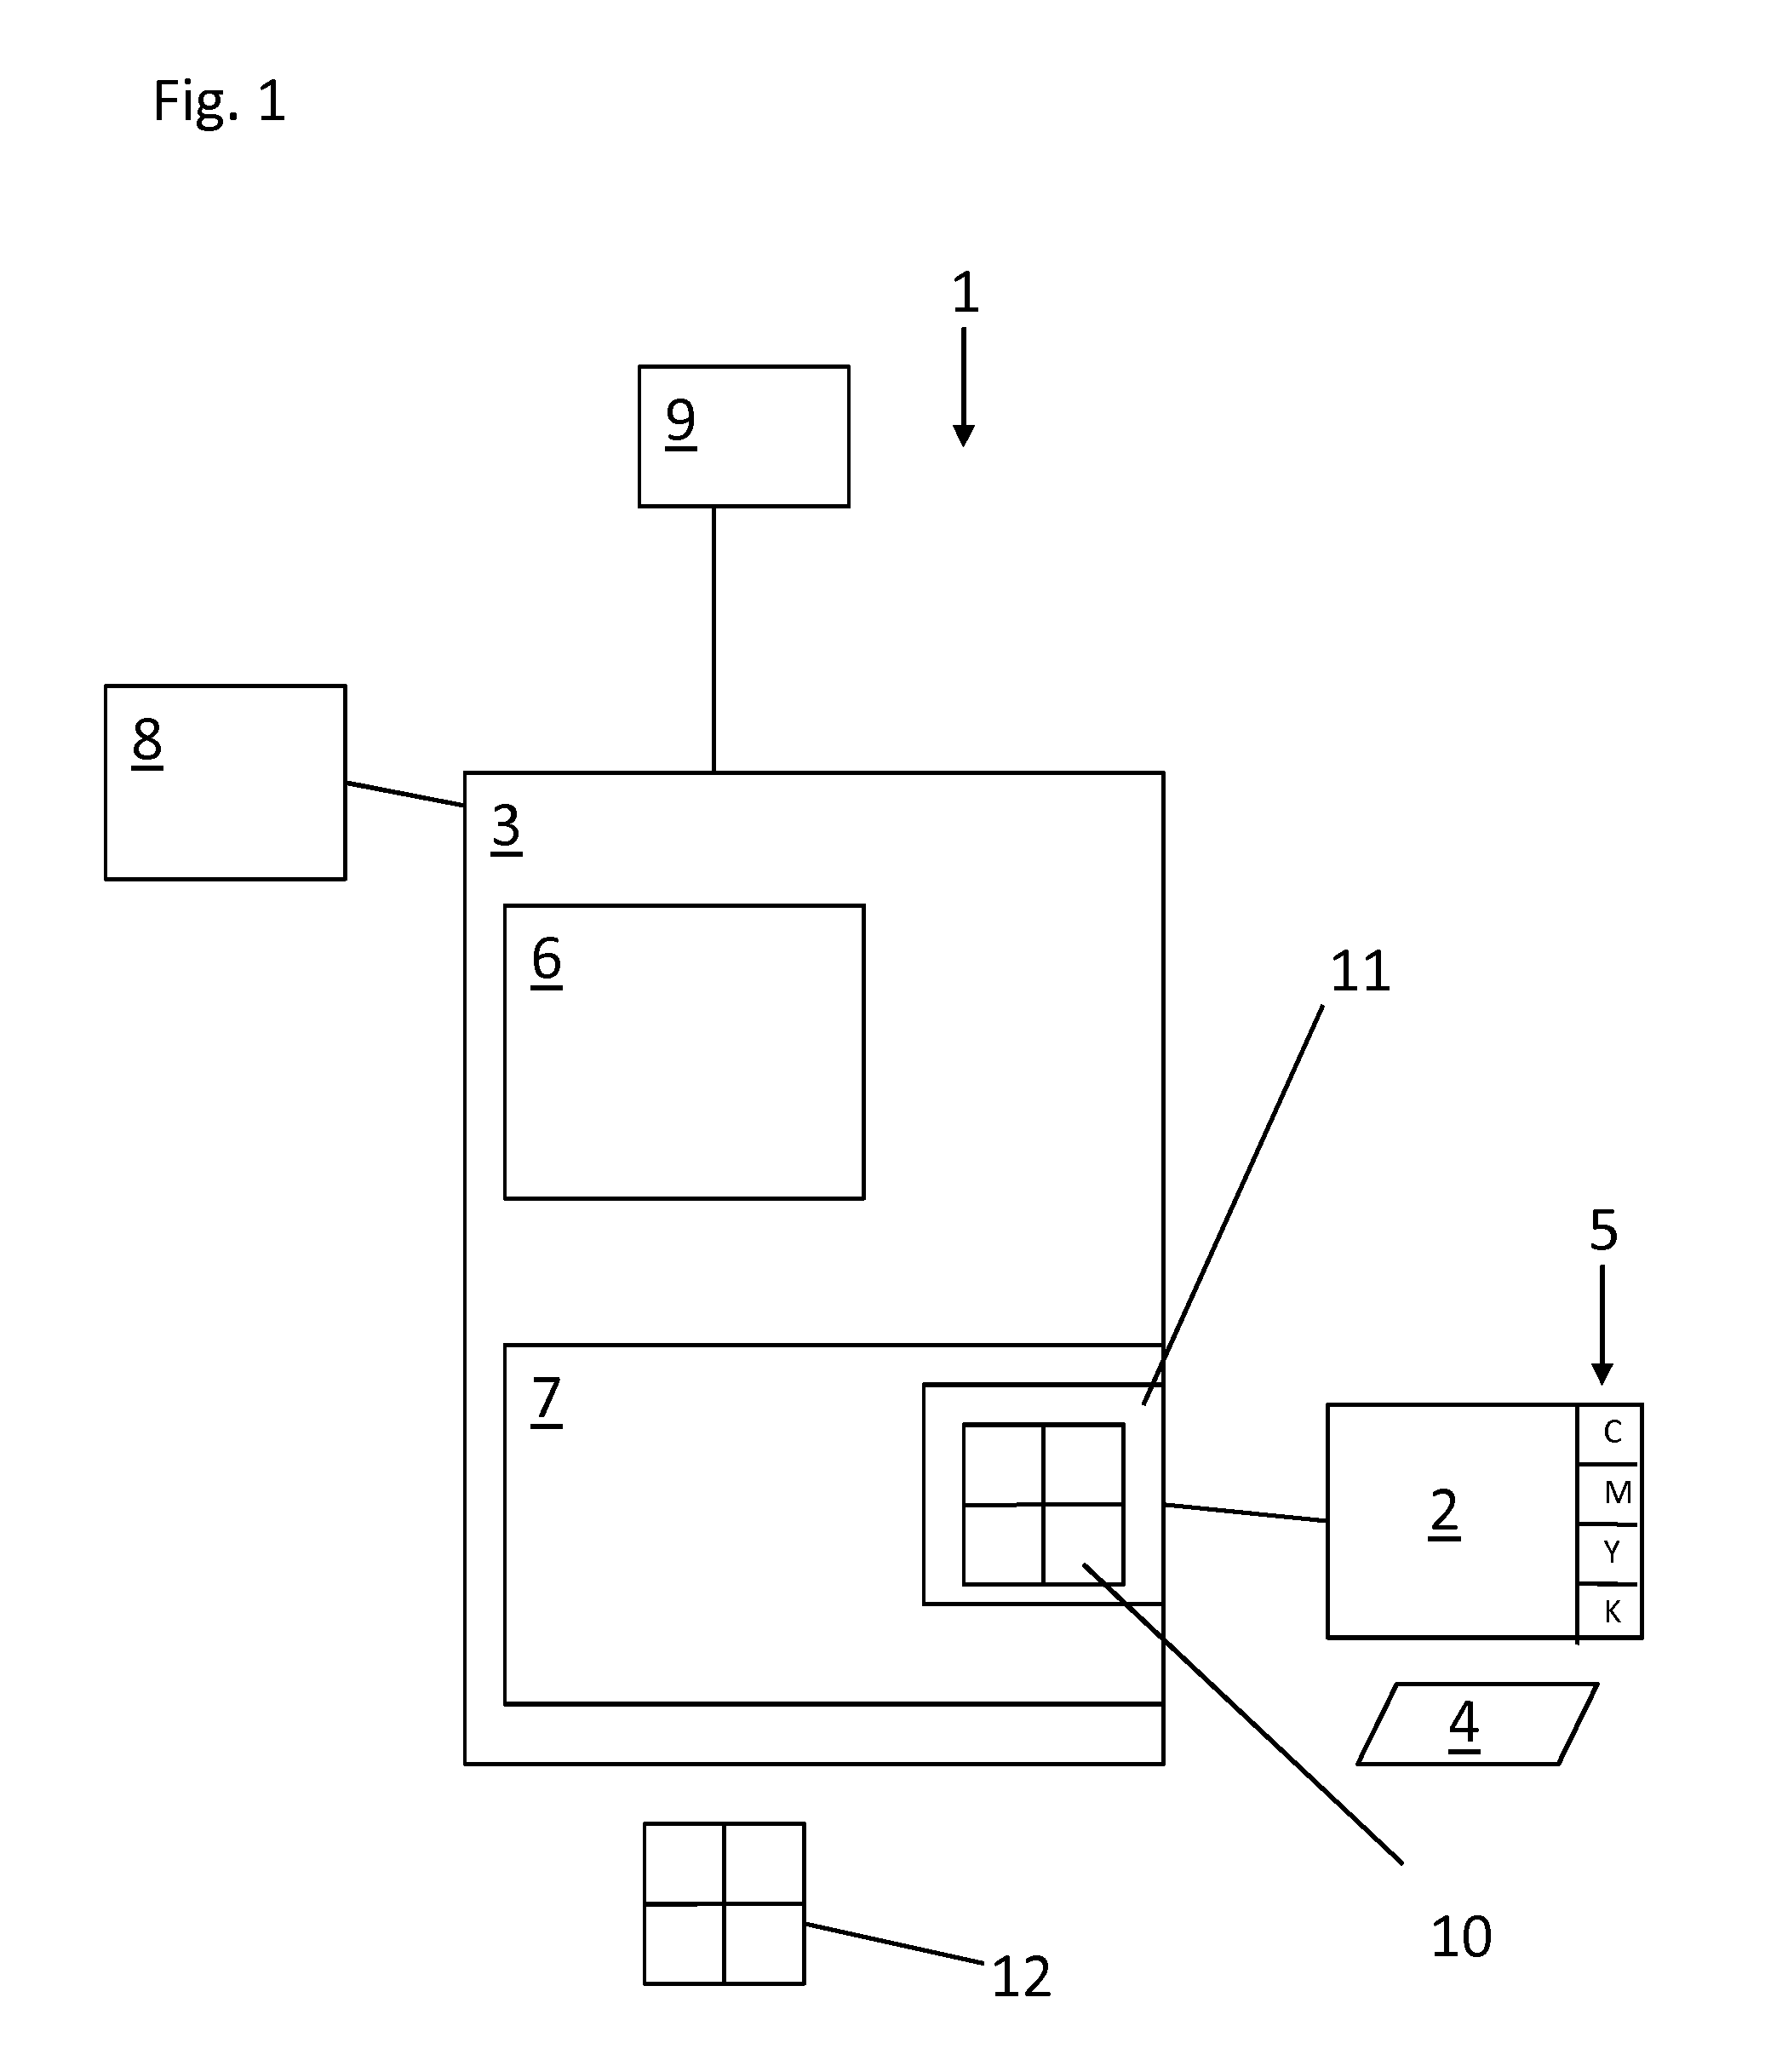 Color separation table optimized for a printing process according to a print attribute by selecting particular Neugebauer primaries and Neugebauer primary area coverages